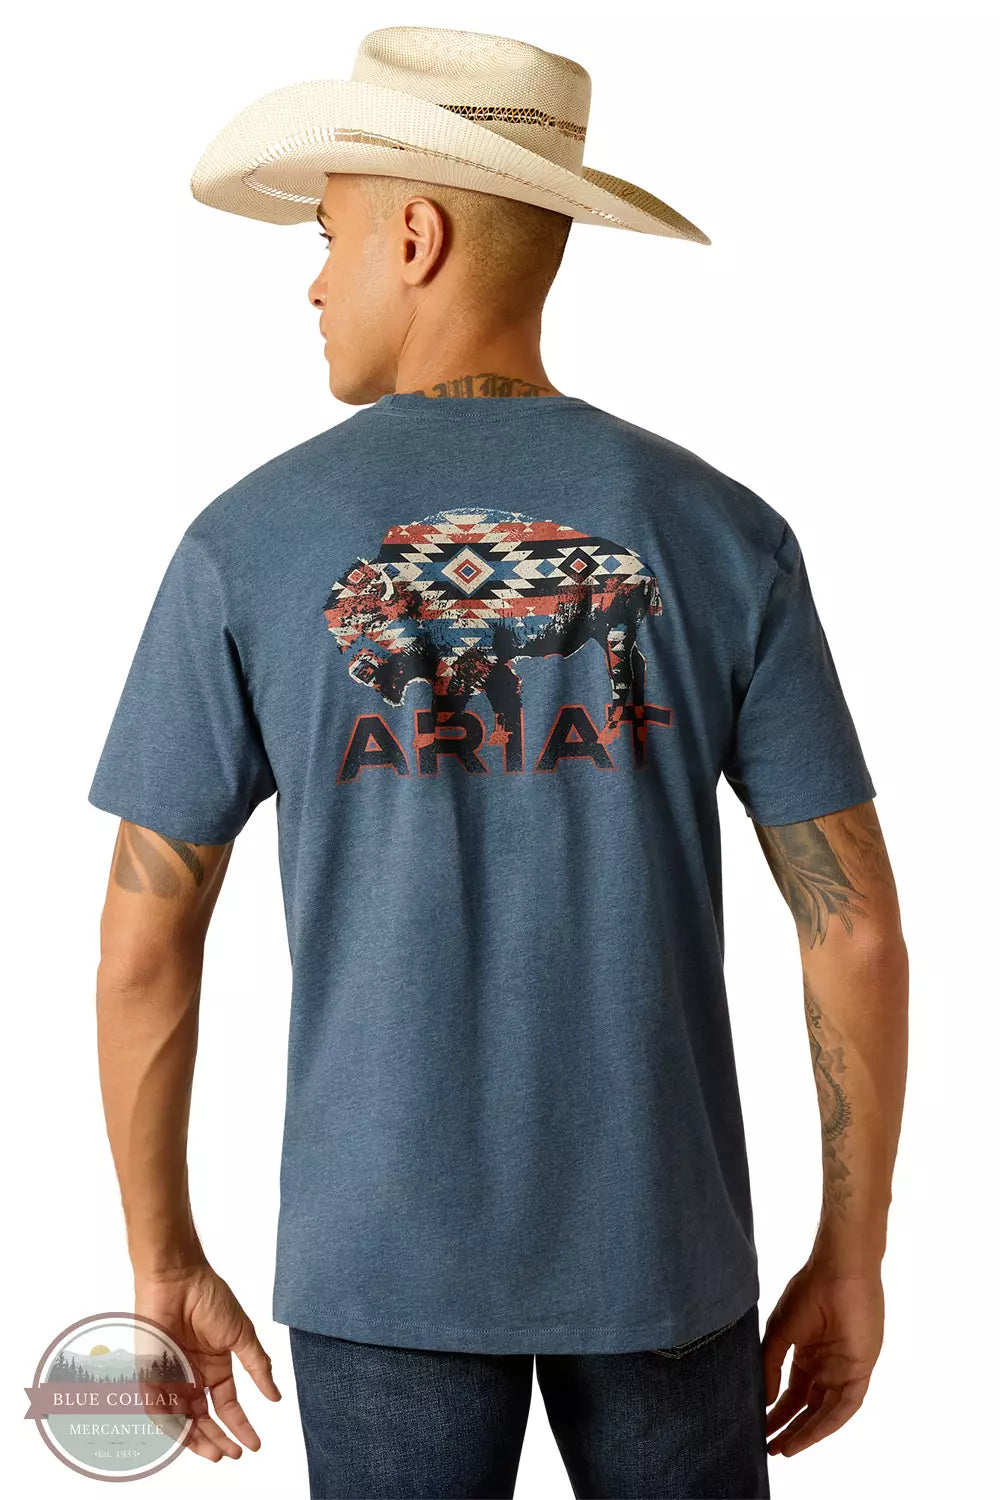 Ariat 10051457 Southwestern Bison T-Shirt in Sailor Blue Heather Back View